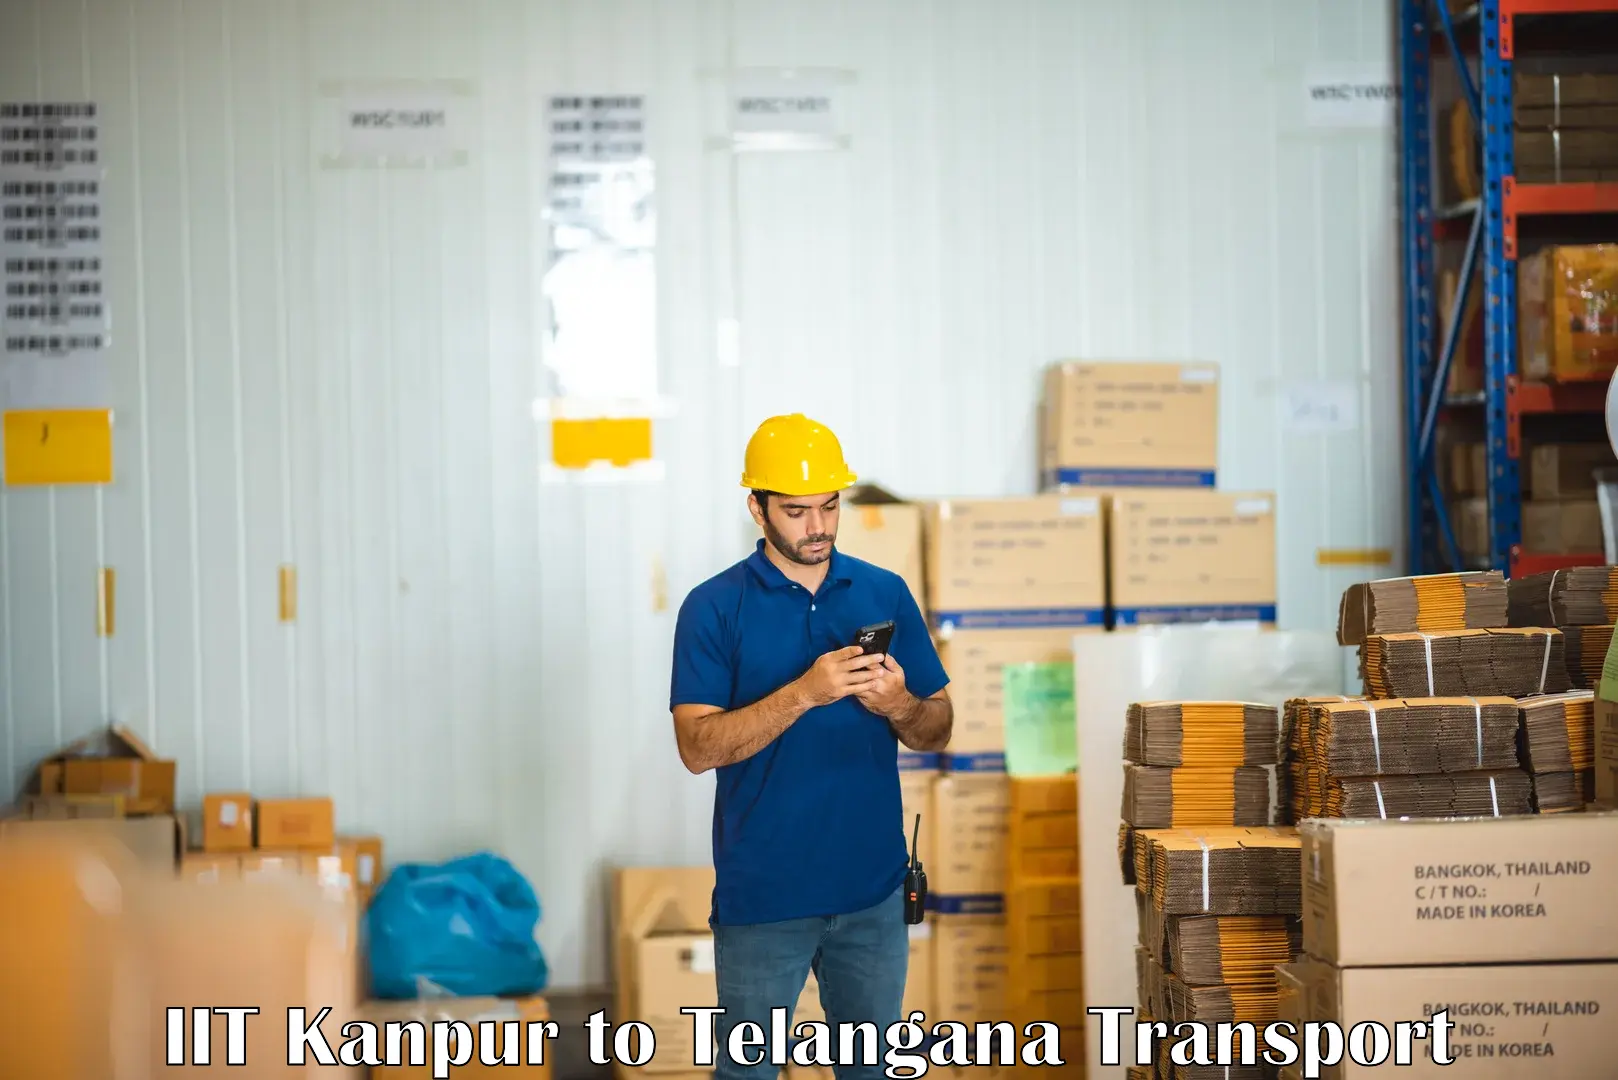 Road transport online services IIT Kanpur to Secunderabad